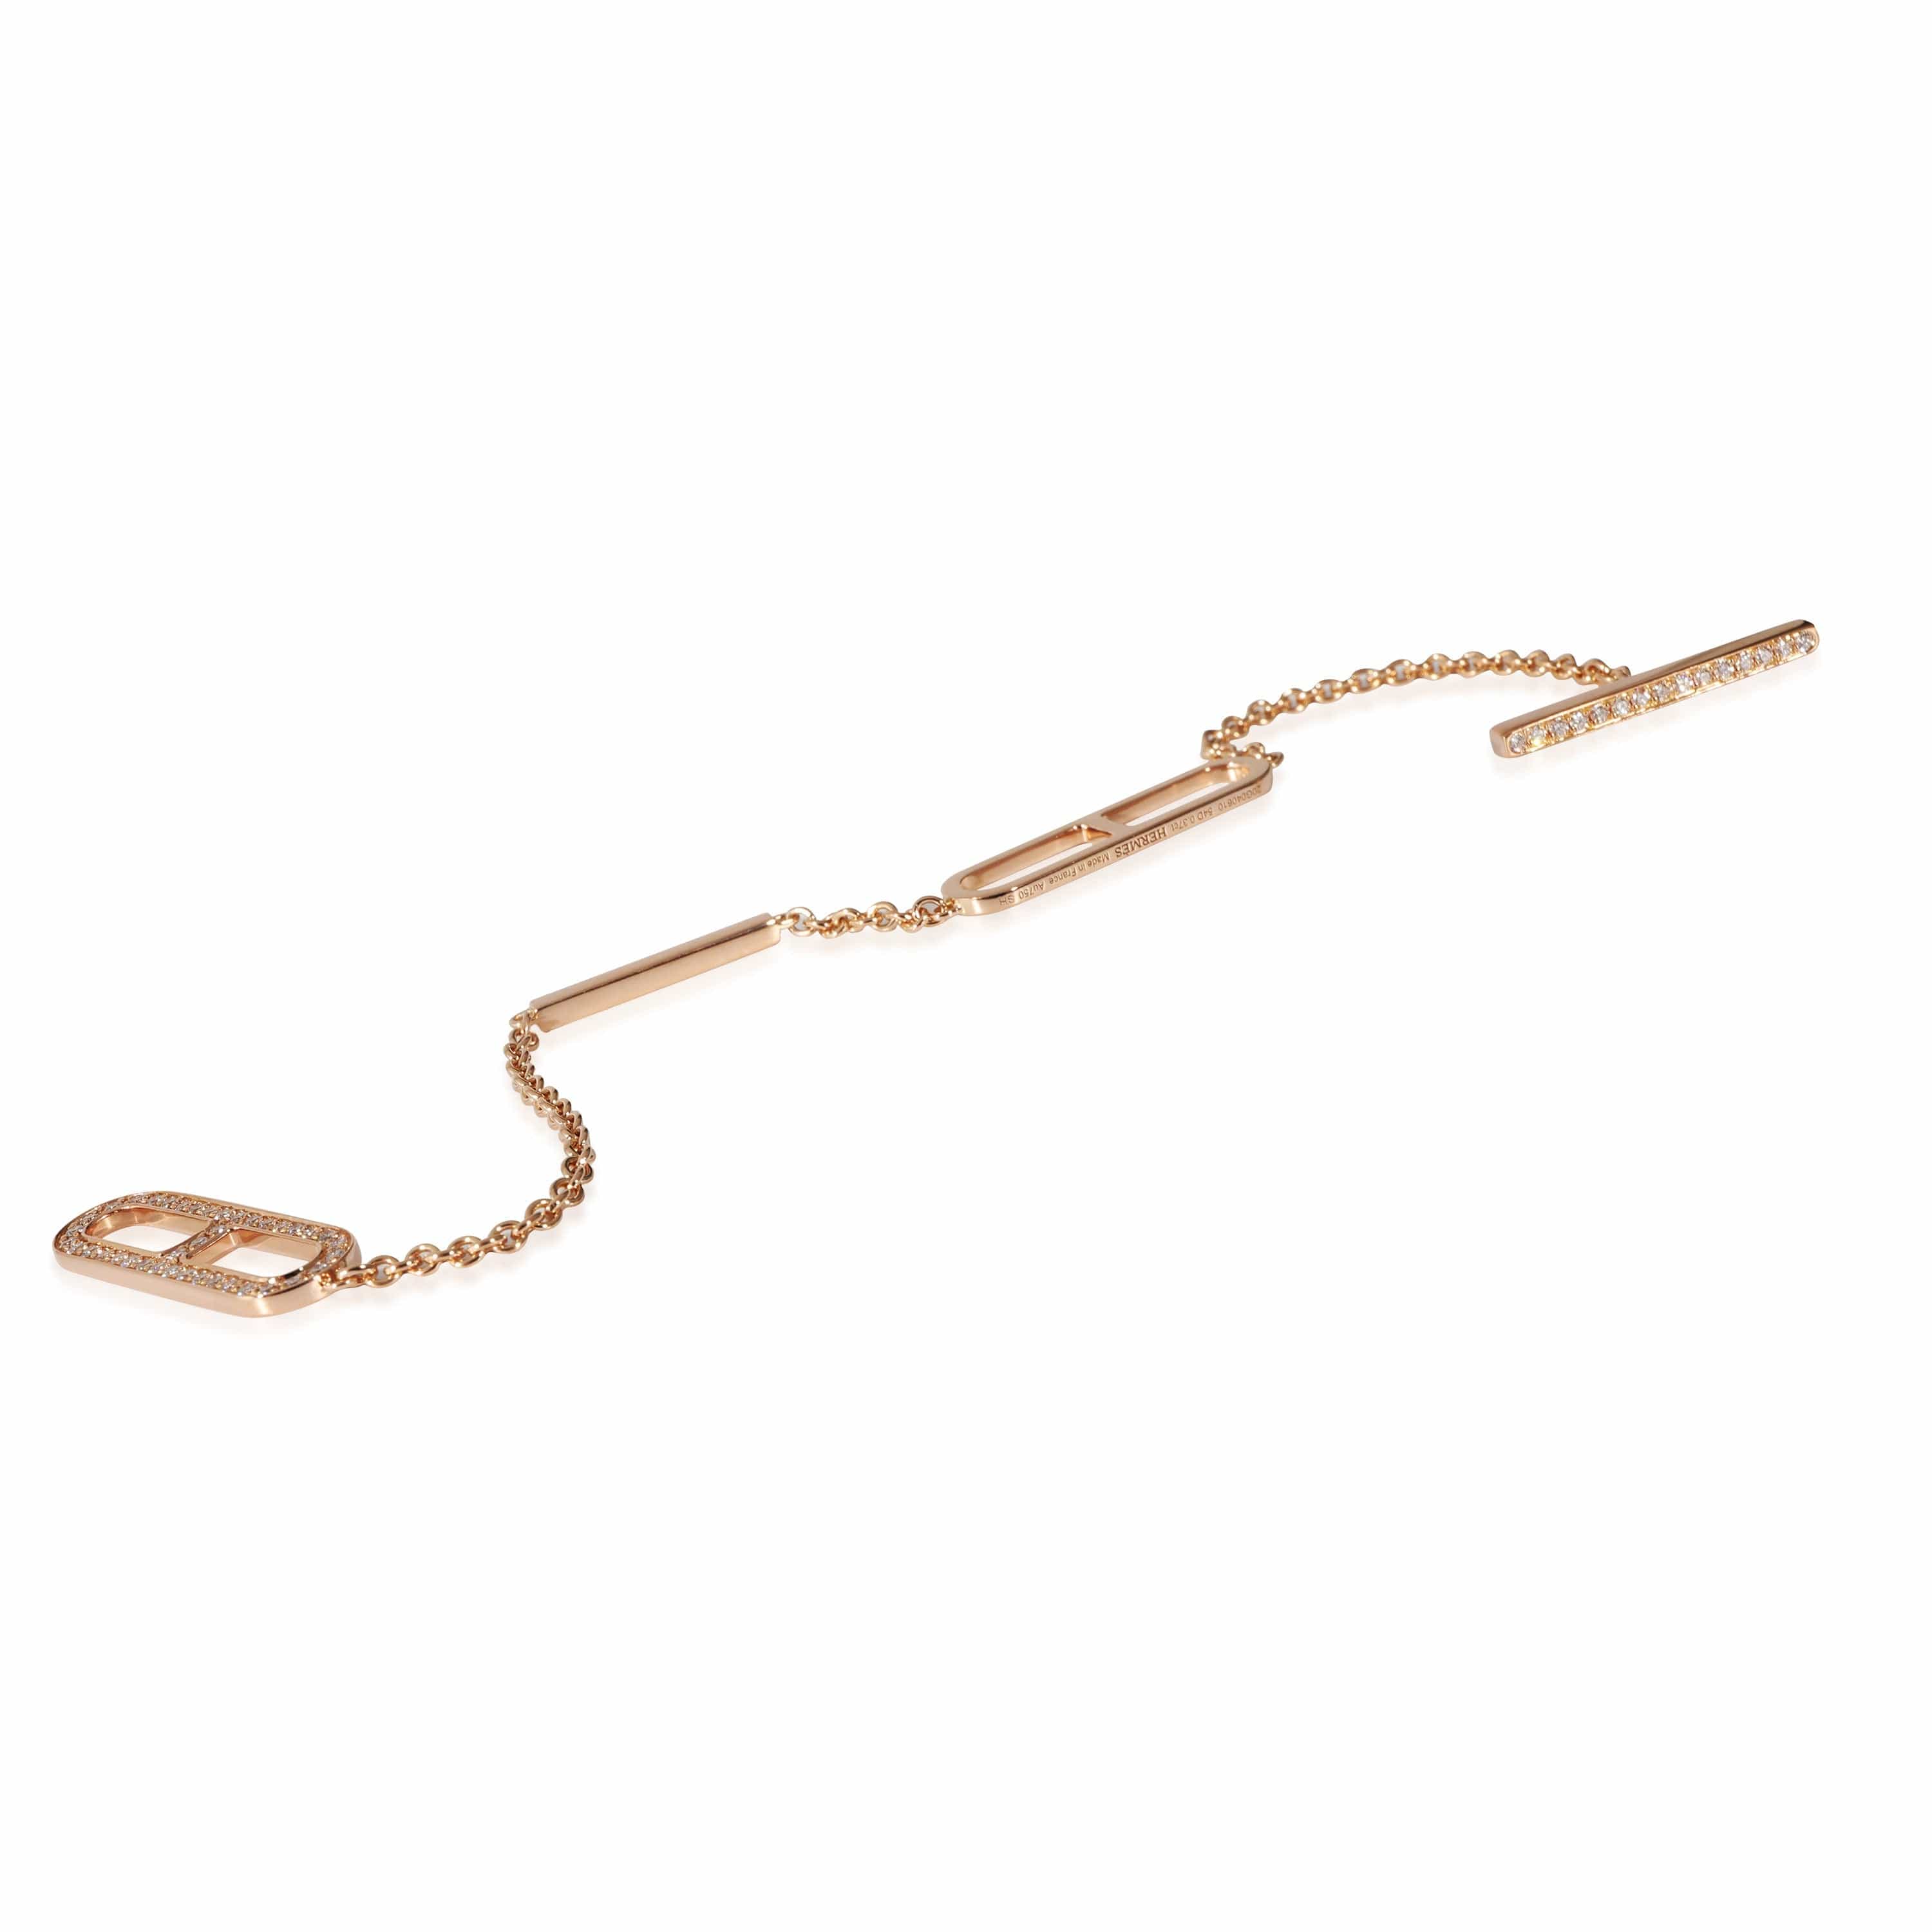 Hermès Hermes Ever Chaine D'Ancre Bracelet, Small Model in 18KT Rose Gold 0.37ctw